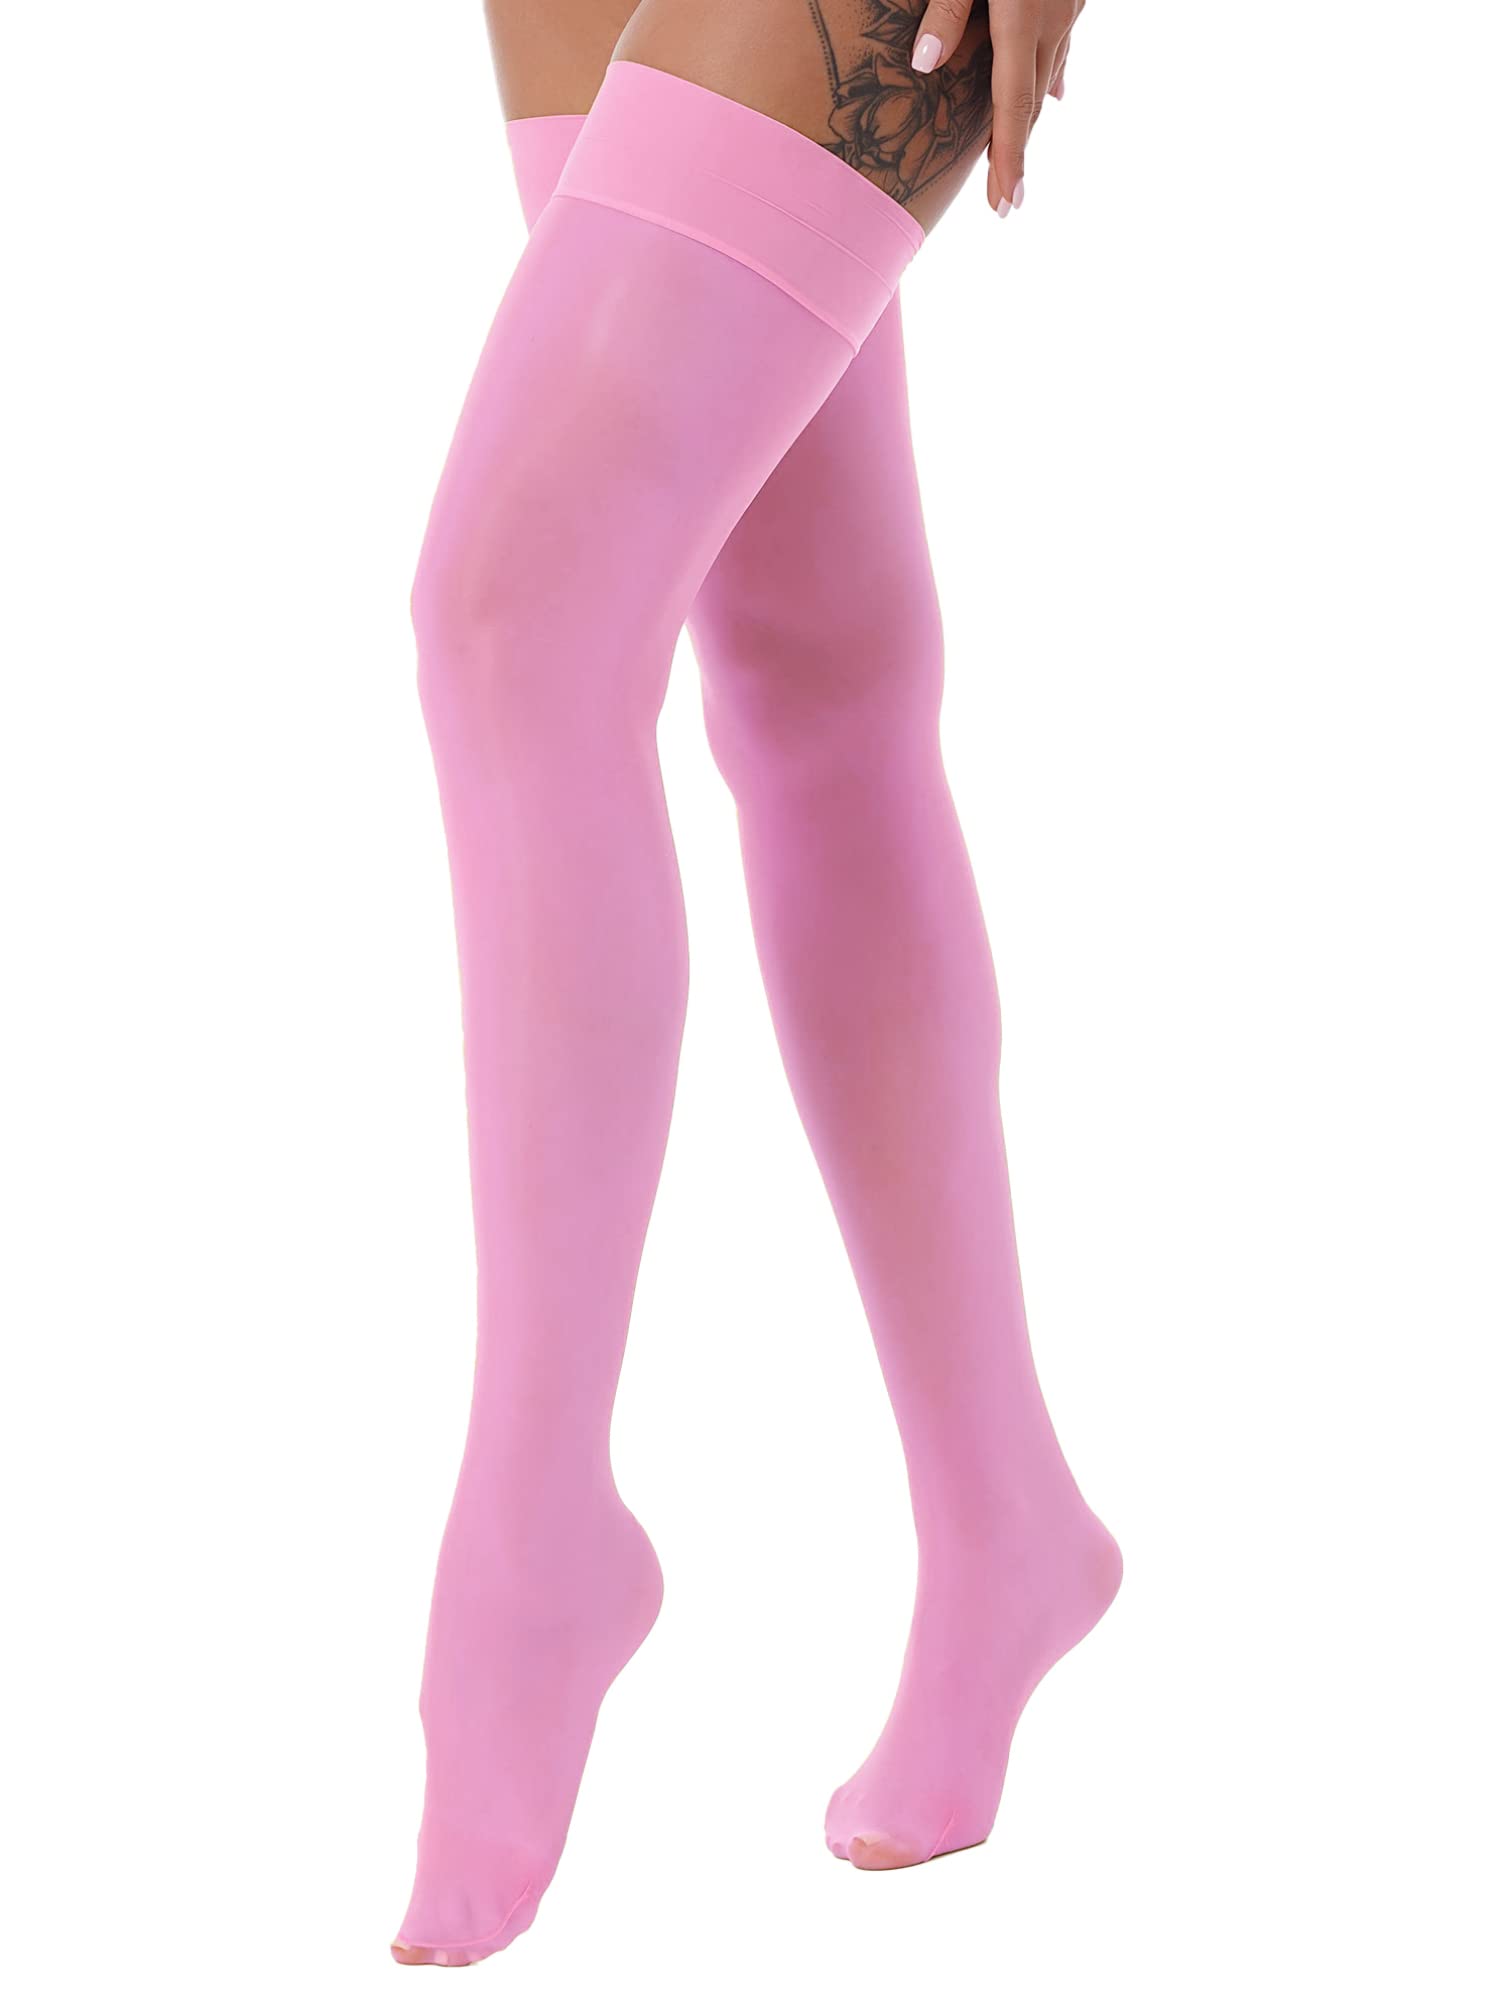 MSemis Woman's Silk Nylon Thigh High Stocking Pantyhose Socks Stay Up Ultra Thin Over The Knee Long Socks Pink One Size